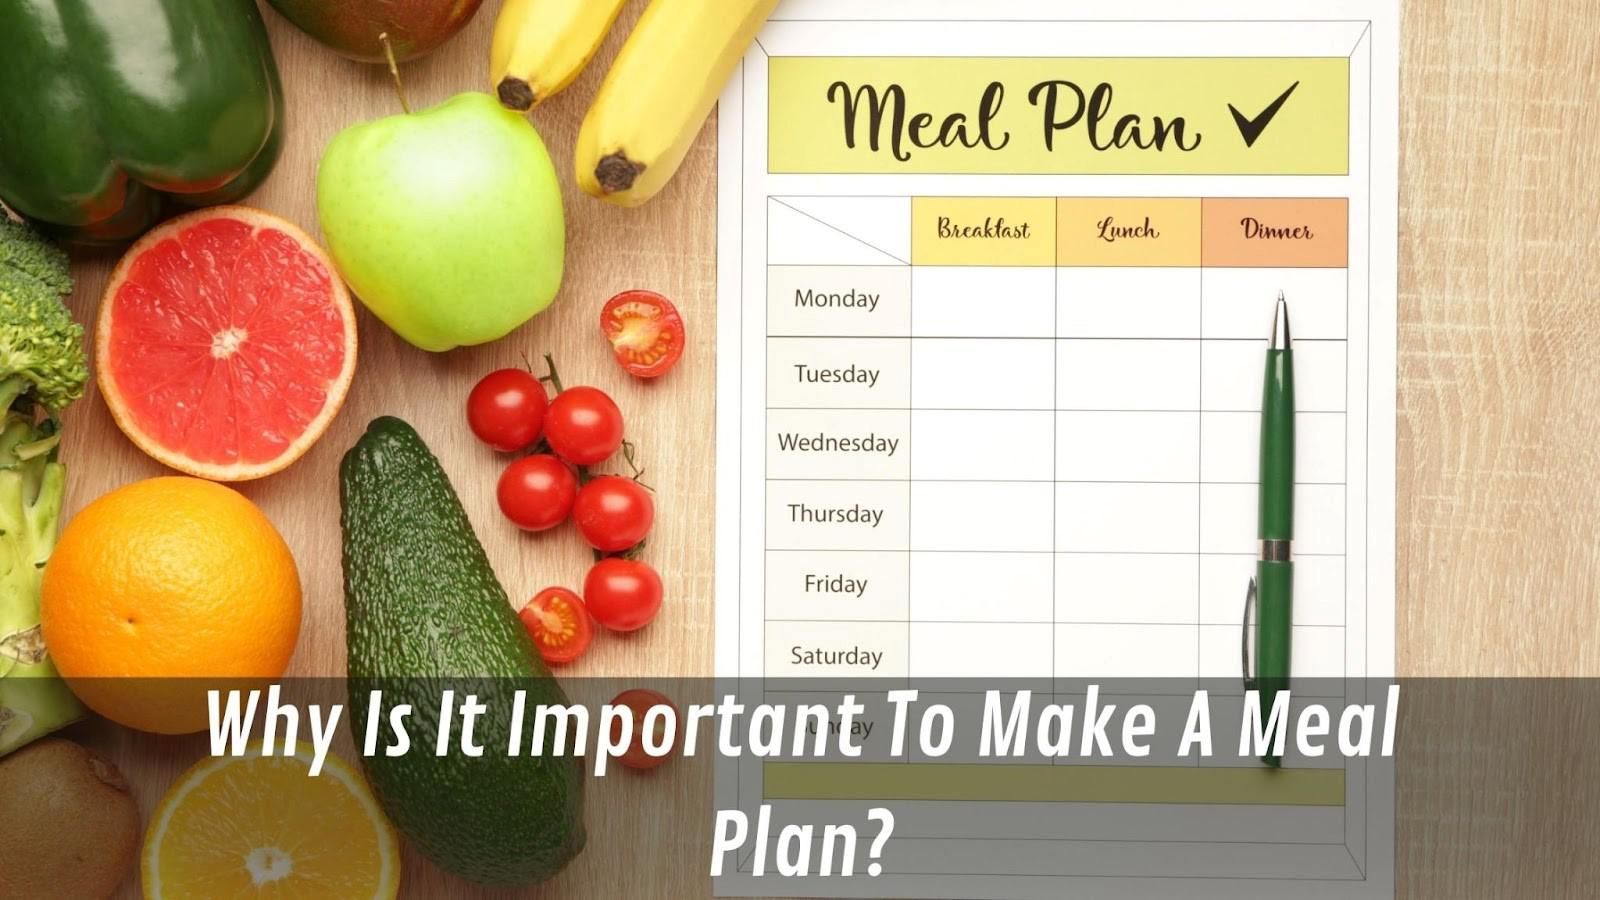 Why Is It Important To Make A Meal Plan?